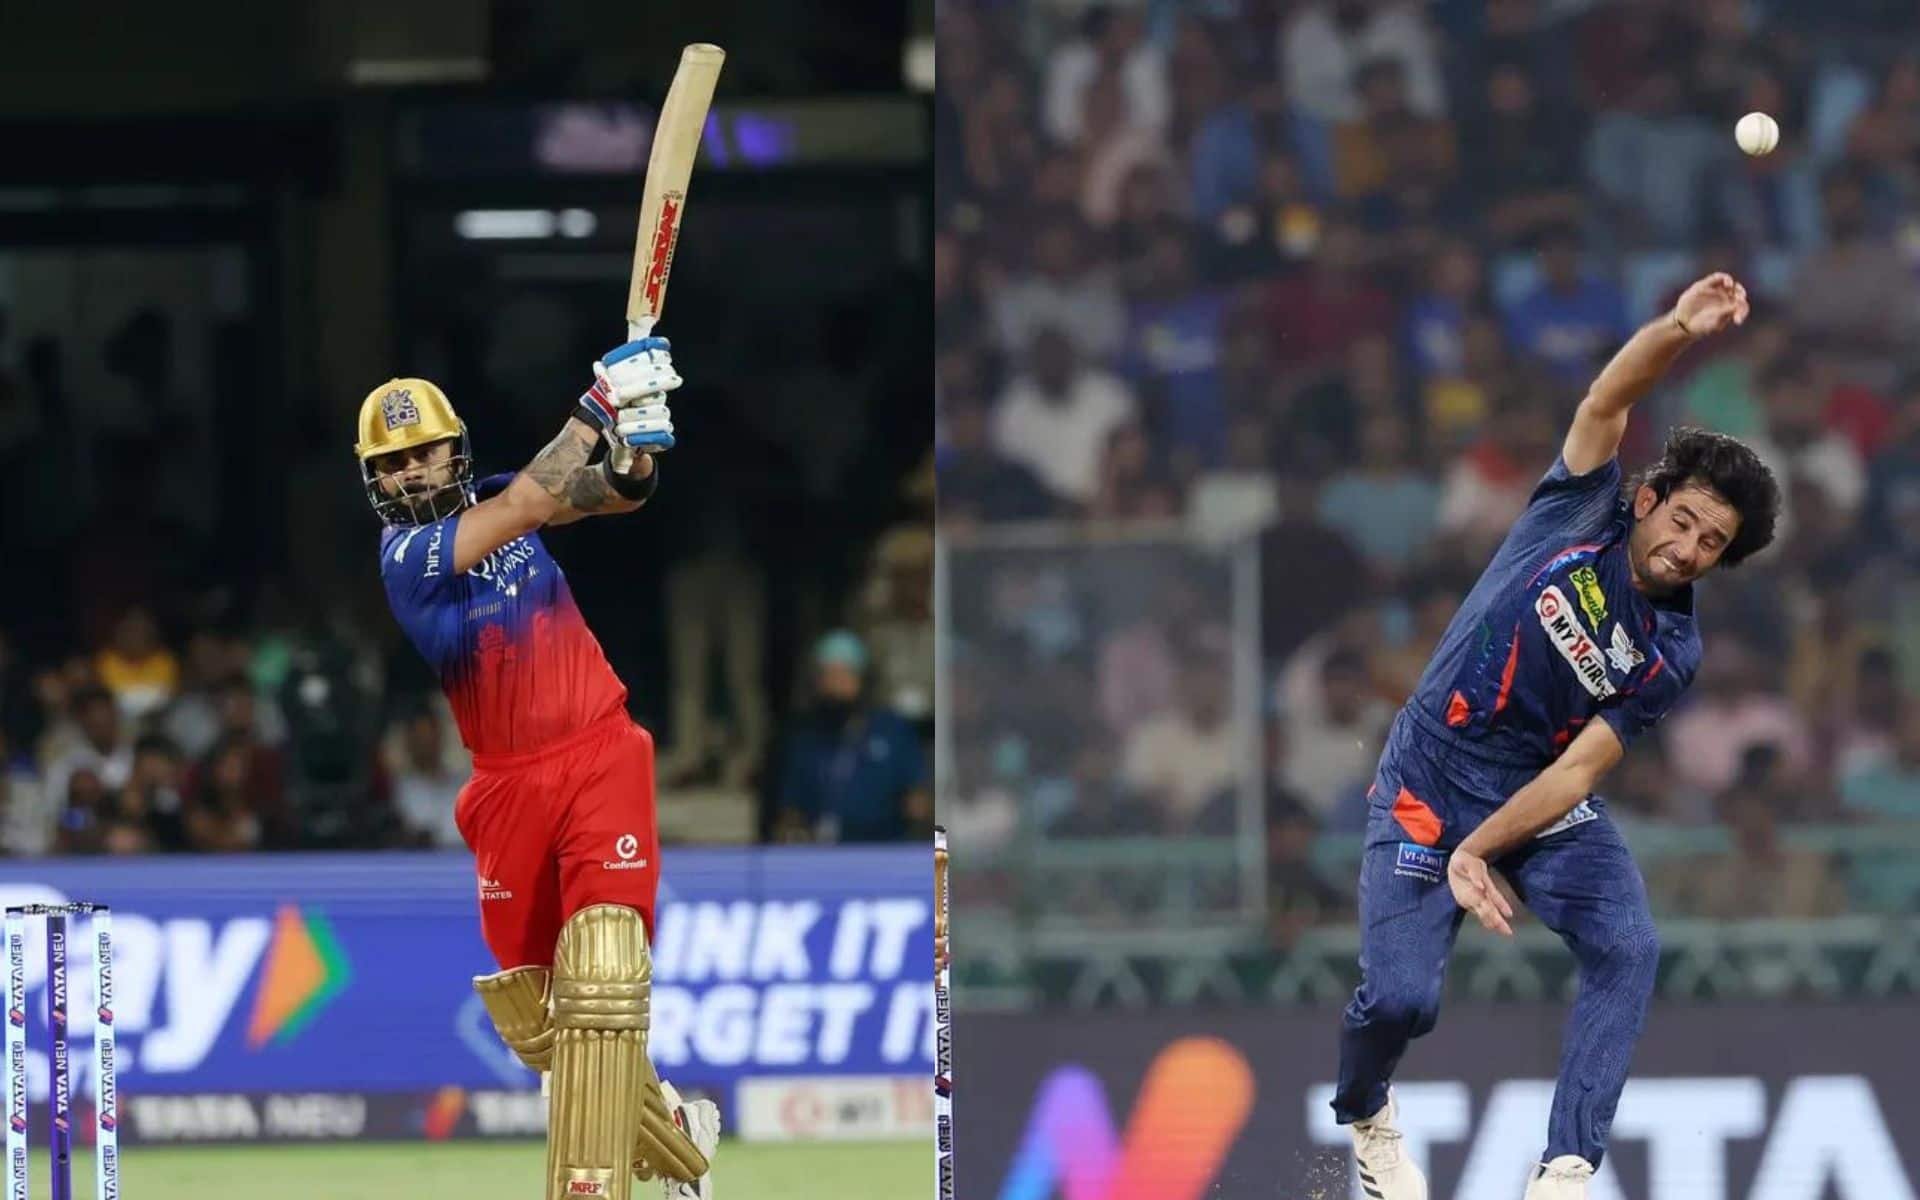 Ravi Bishoi To Get The Better Of Virat Kohli?- Top Player Battles To Watch Out For in RCB vs LSG